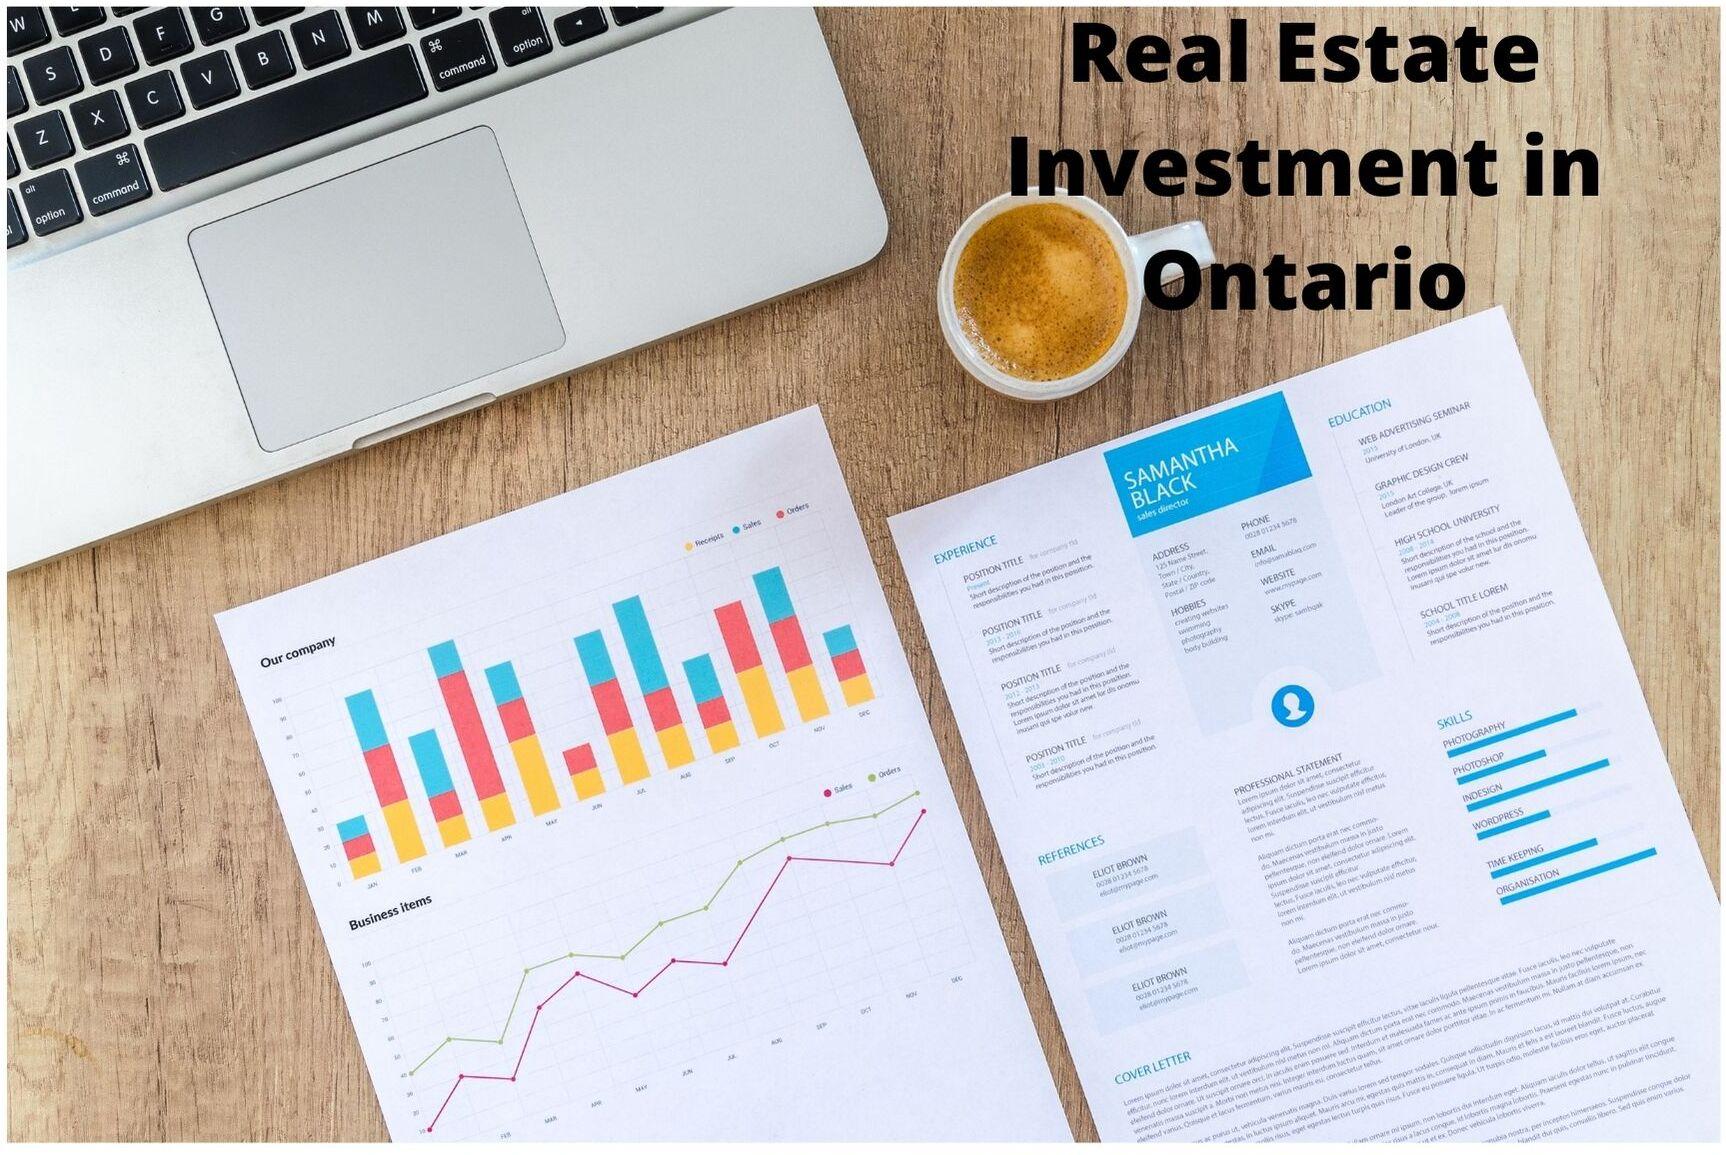 computer and market reports are used to calculate Real estate investment in Ontario 